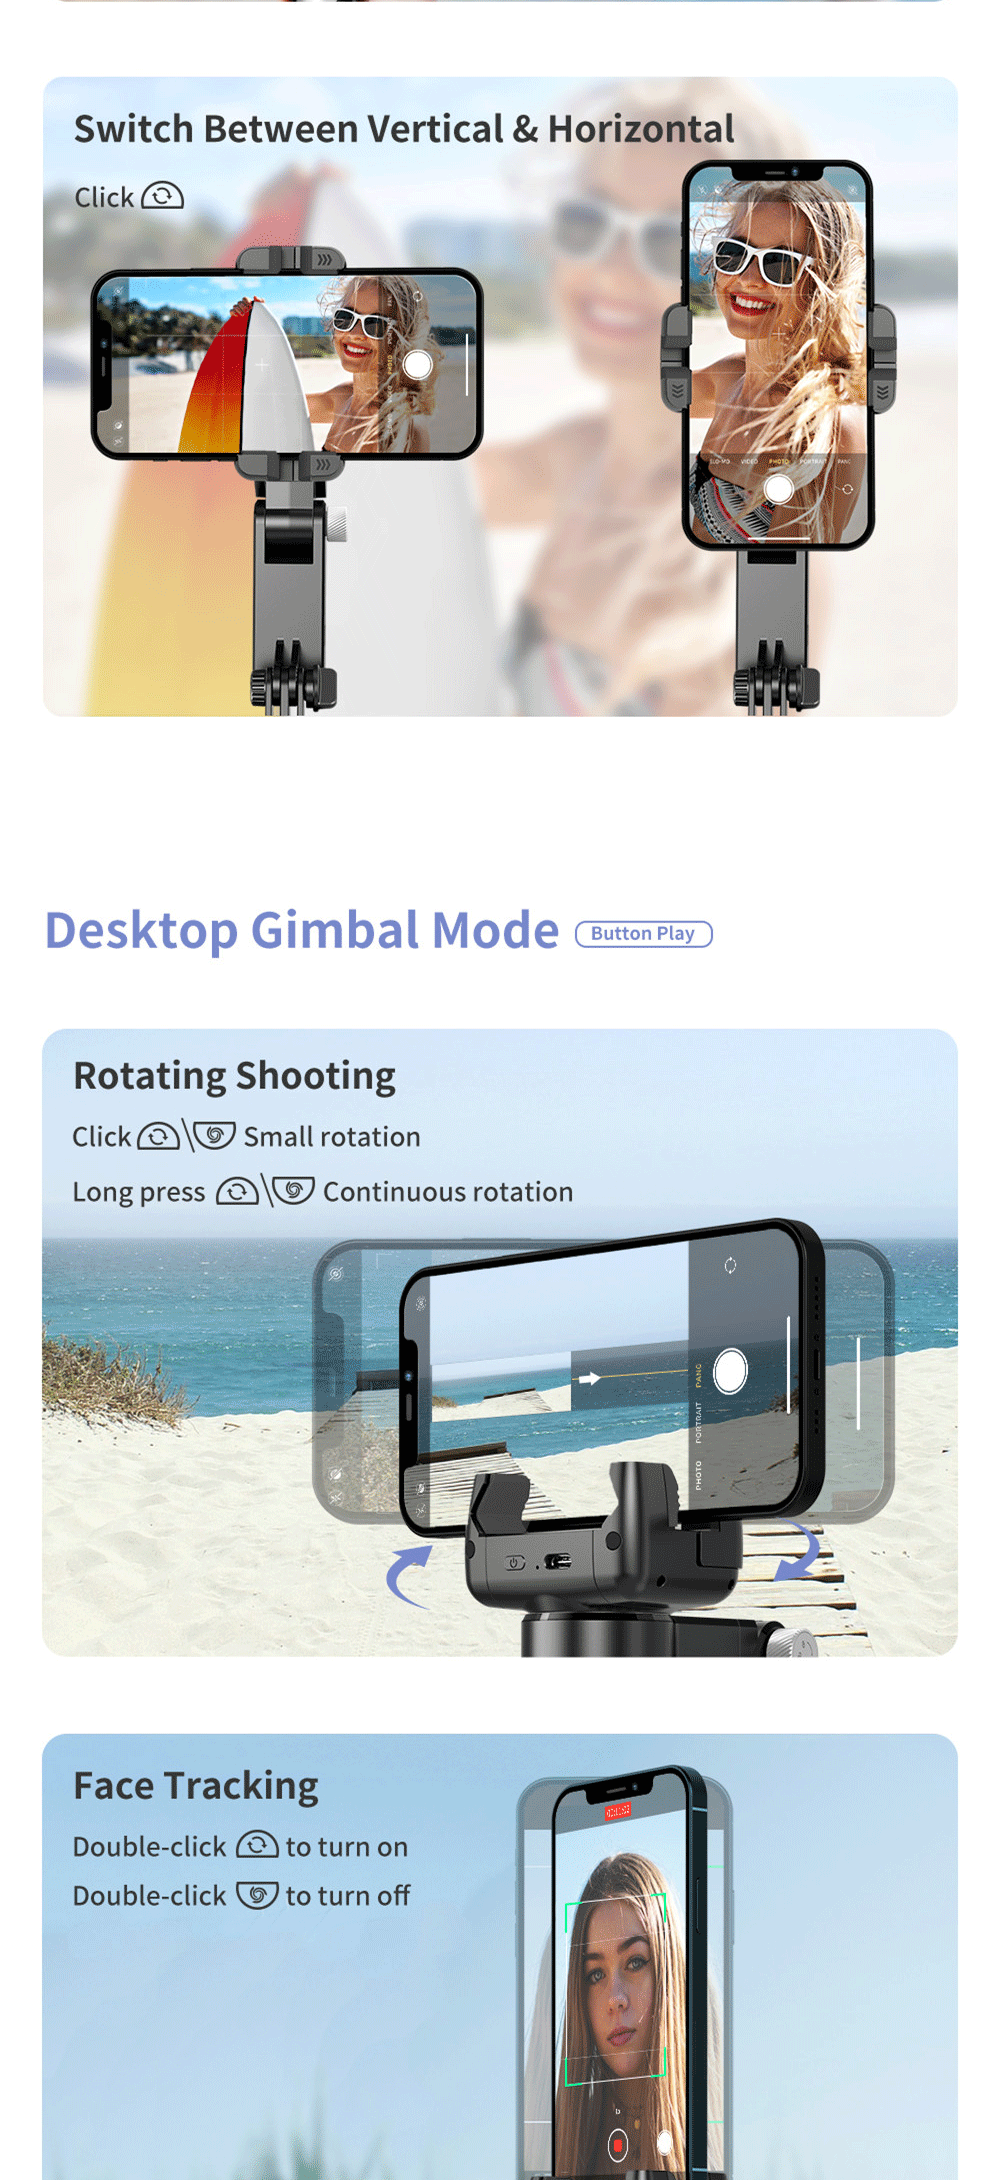 360 Rotation Auto-Tracking Shooting Mode. Gimbal Stabilizer Selfie Stick Tripod Smartphone Live Photography. For Content Creators/Bloggers For TikTok Instagram YouTube.